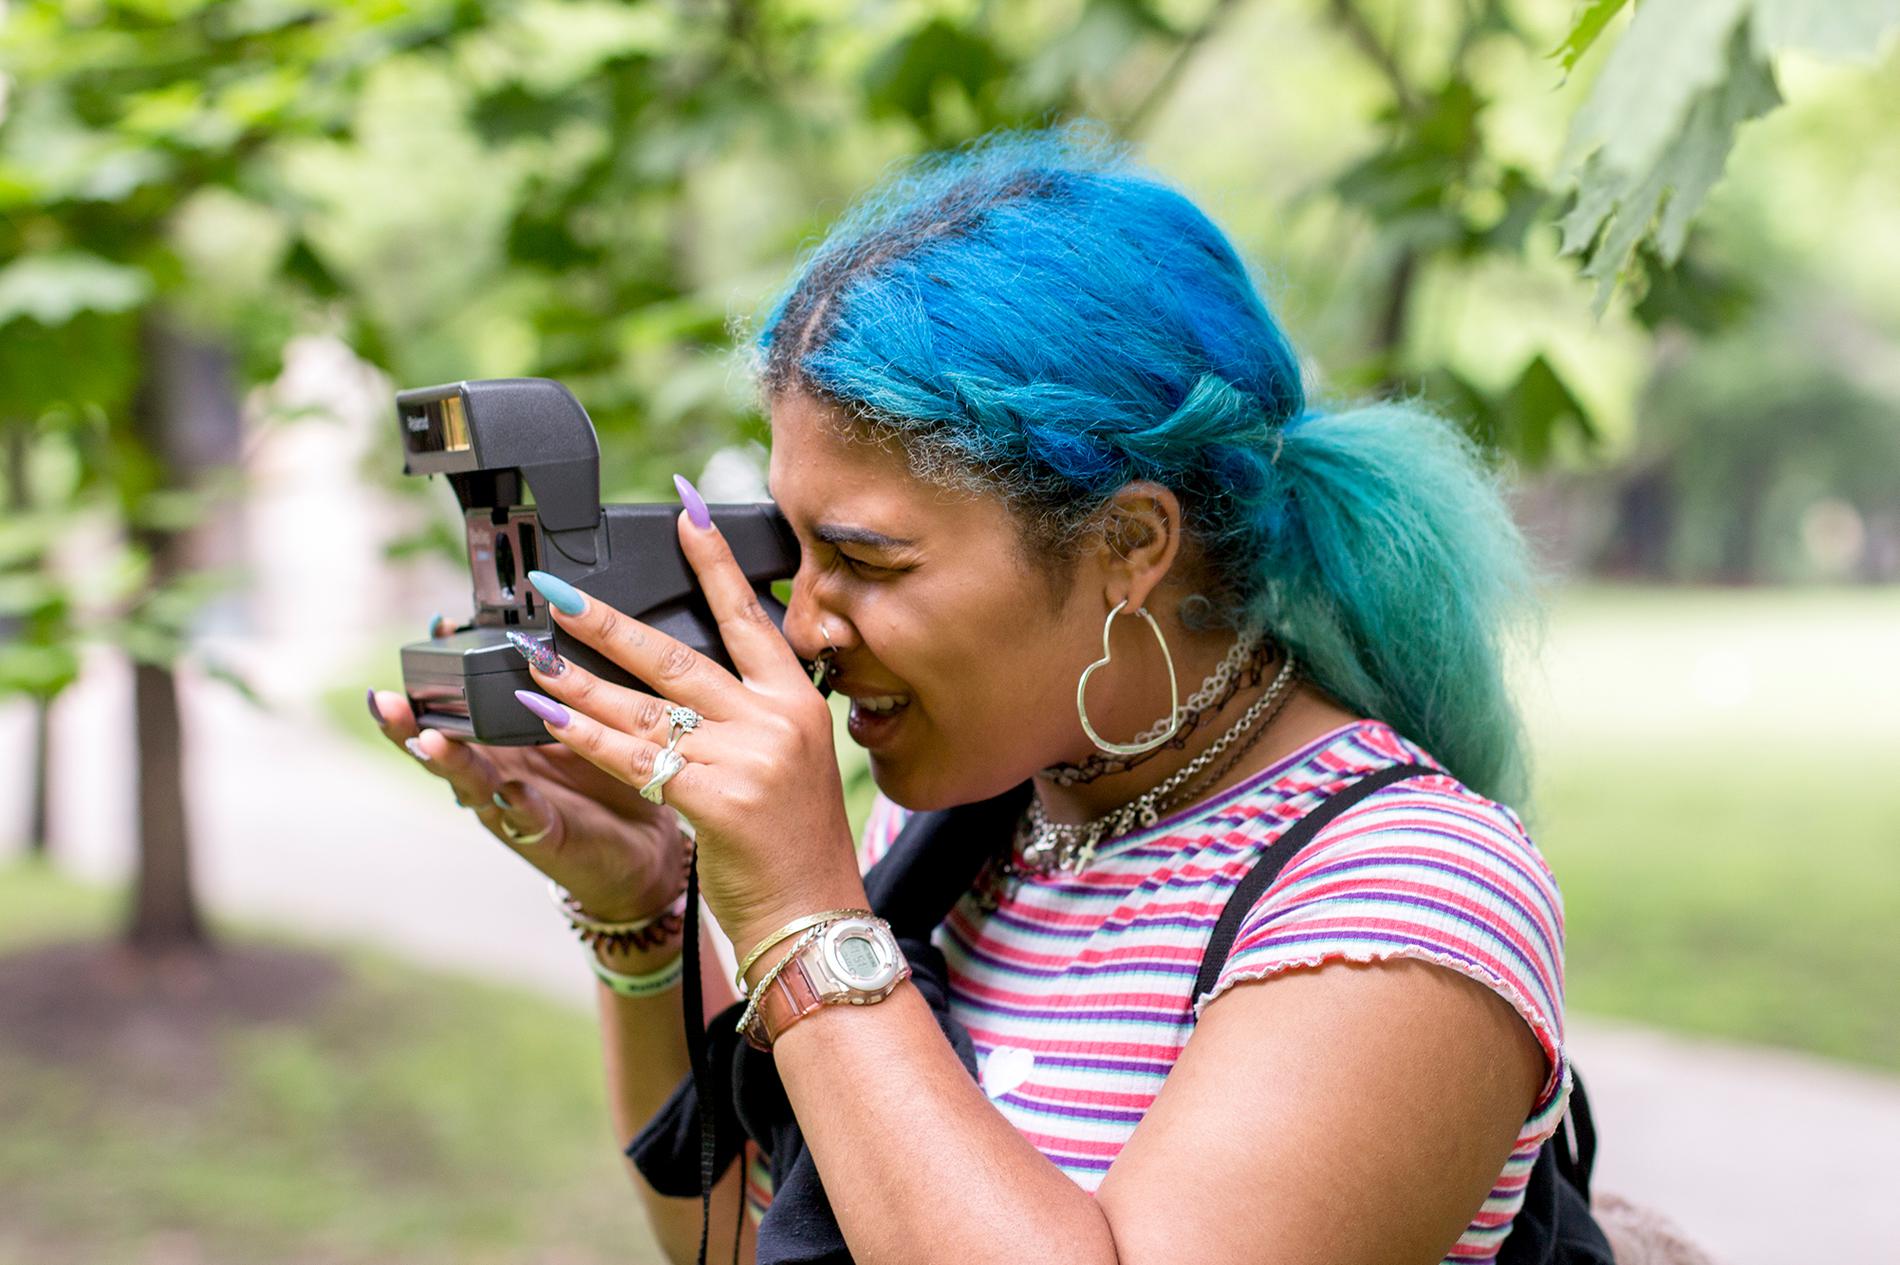 A young woman with blue hair taking a photo with a polaroid camera outside